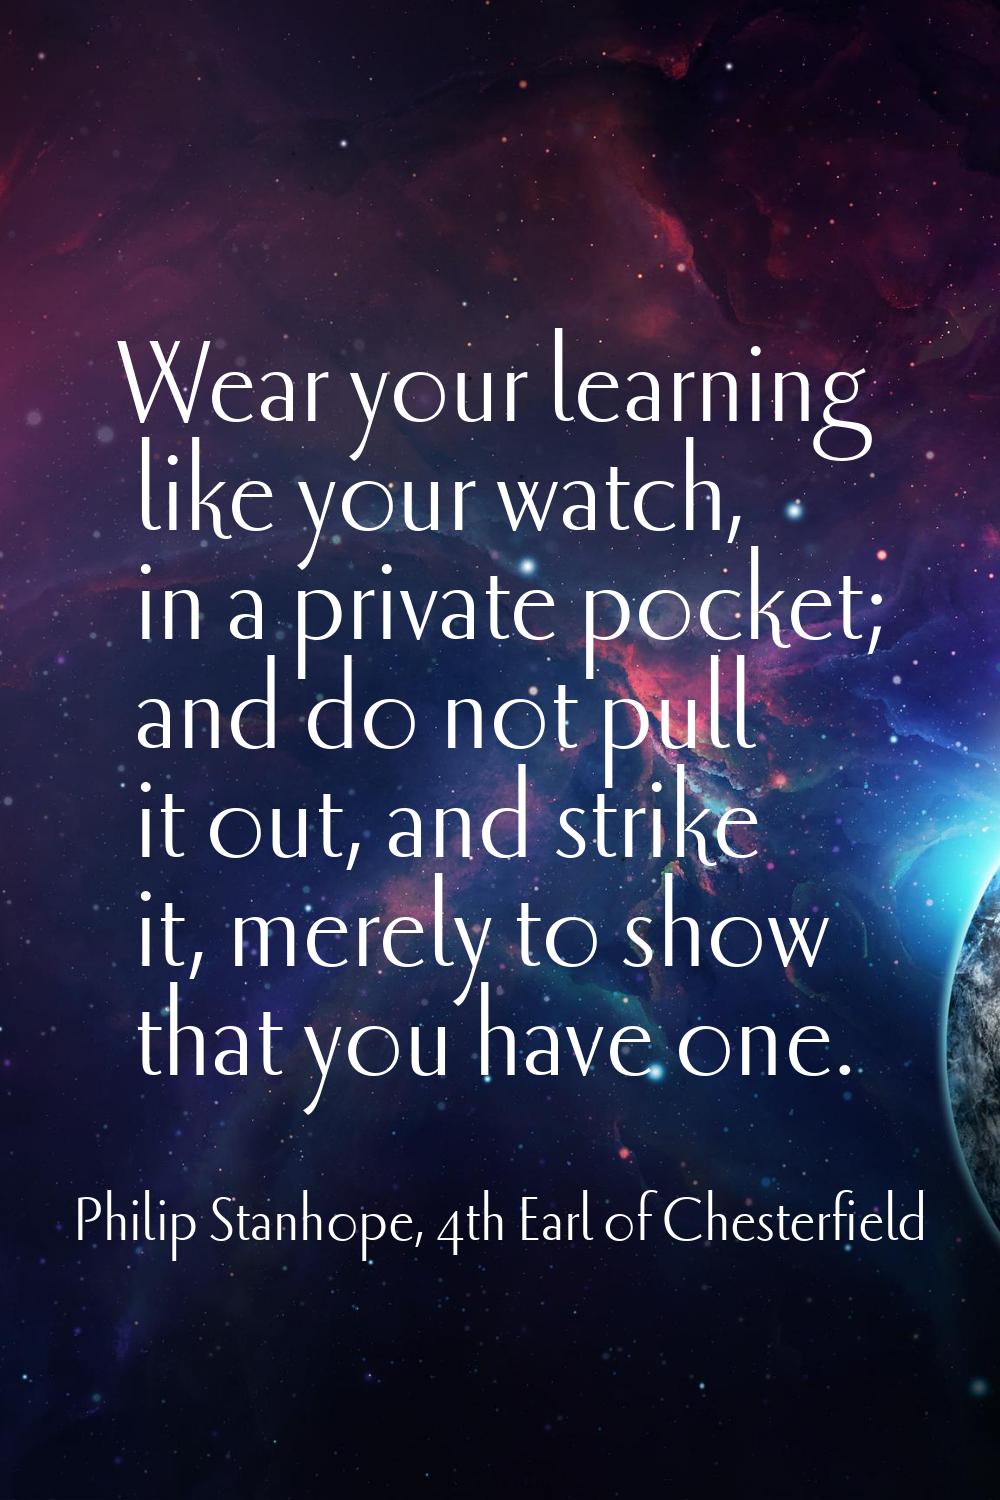 Wear your learning like your watch, in a private pocket; and do not pull it out, and strike it, mer